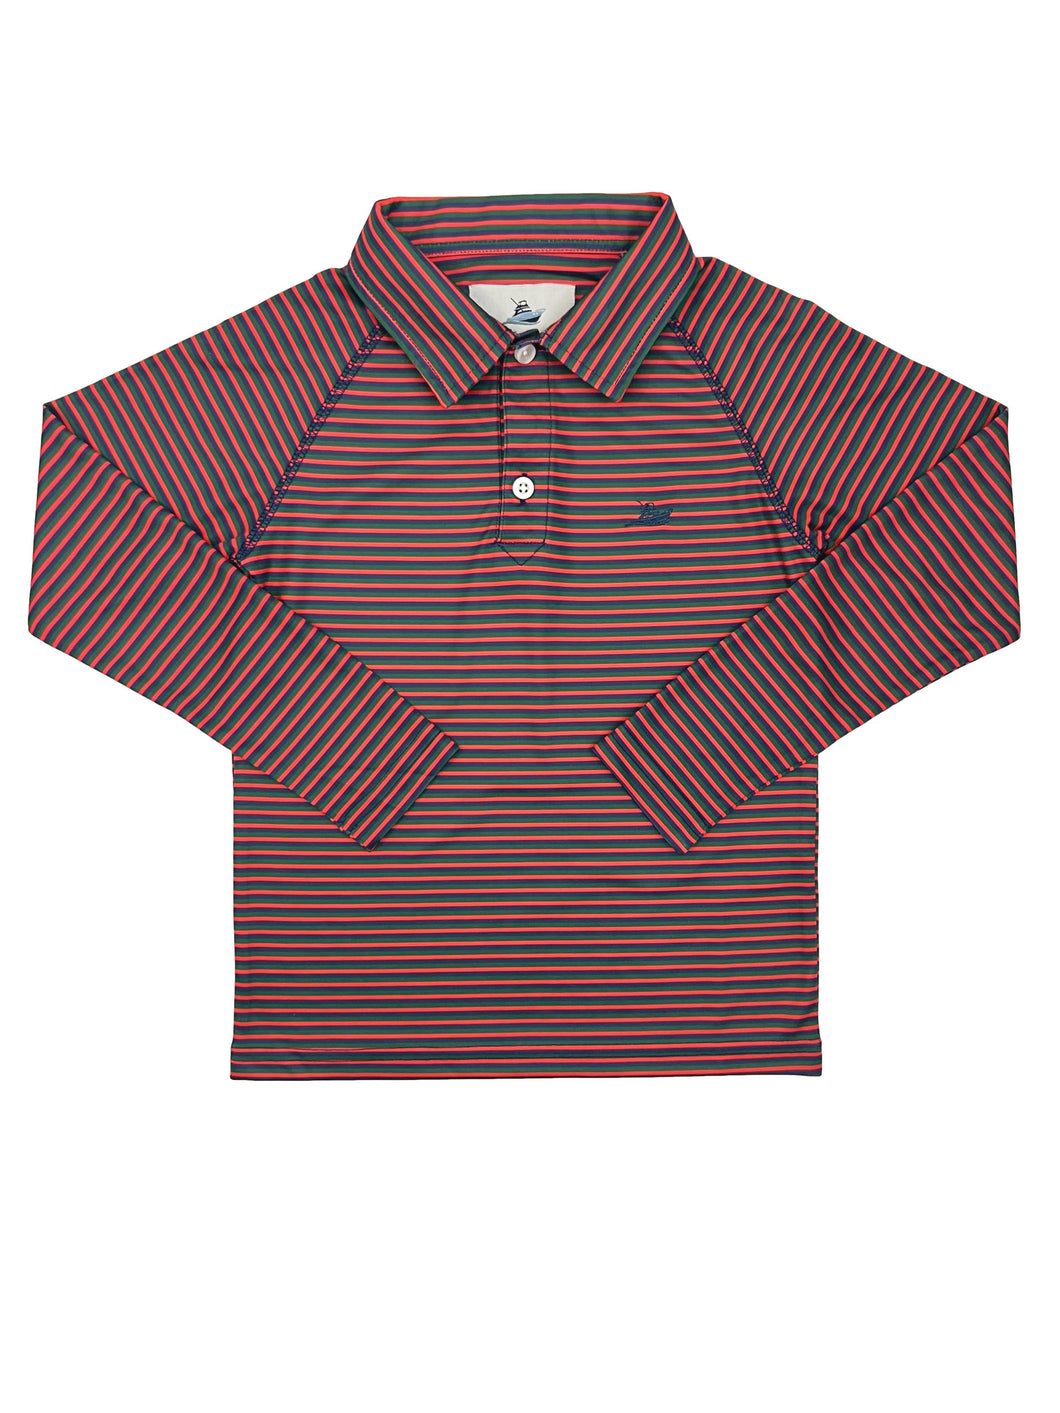 Performance Polo- Red, Navy & Green Stripe